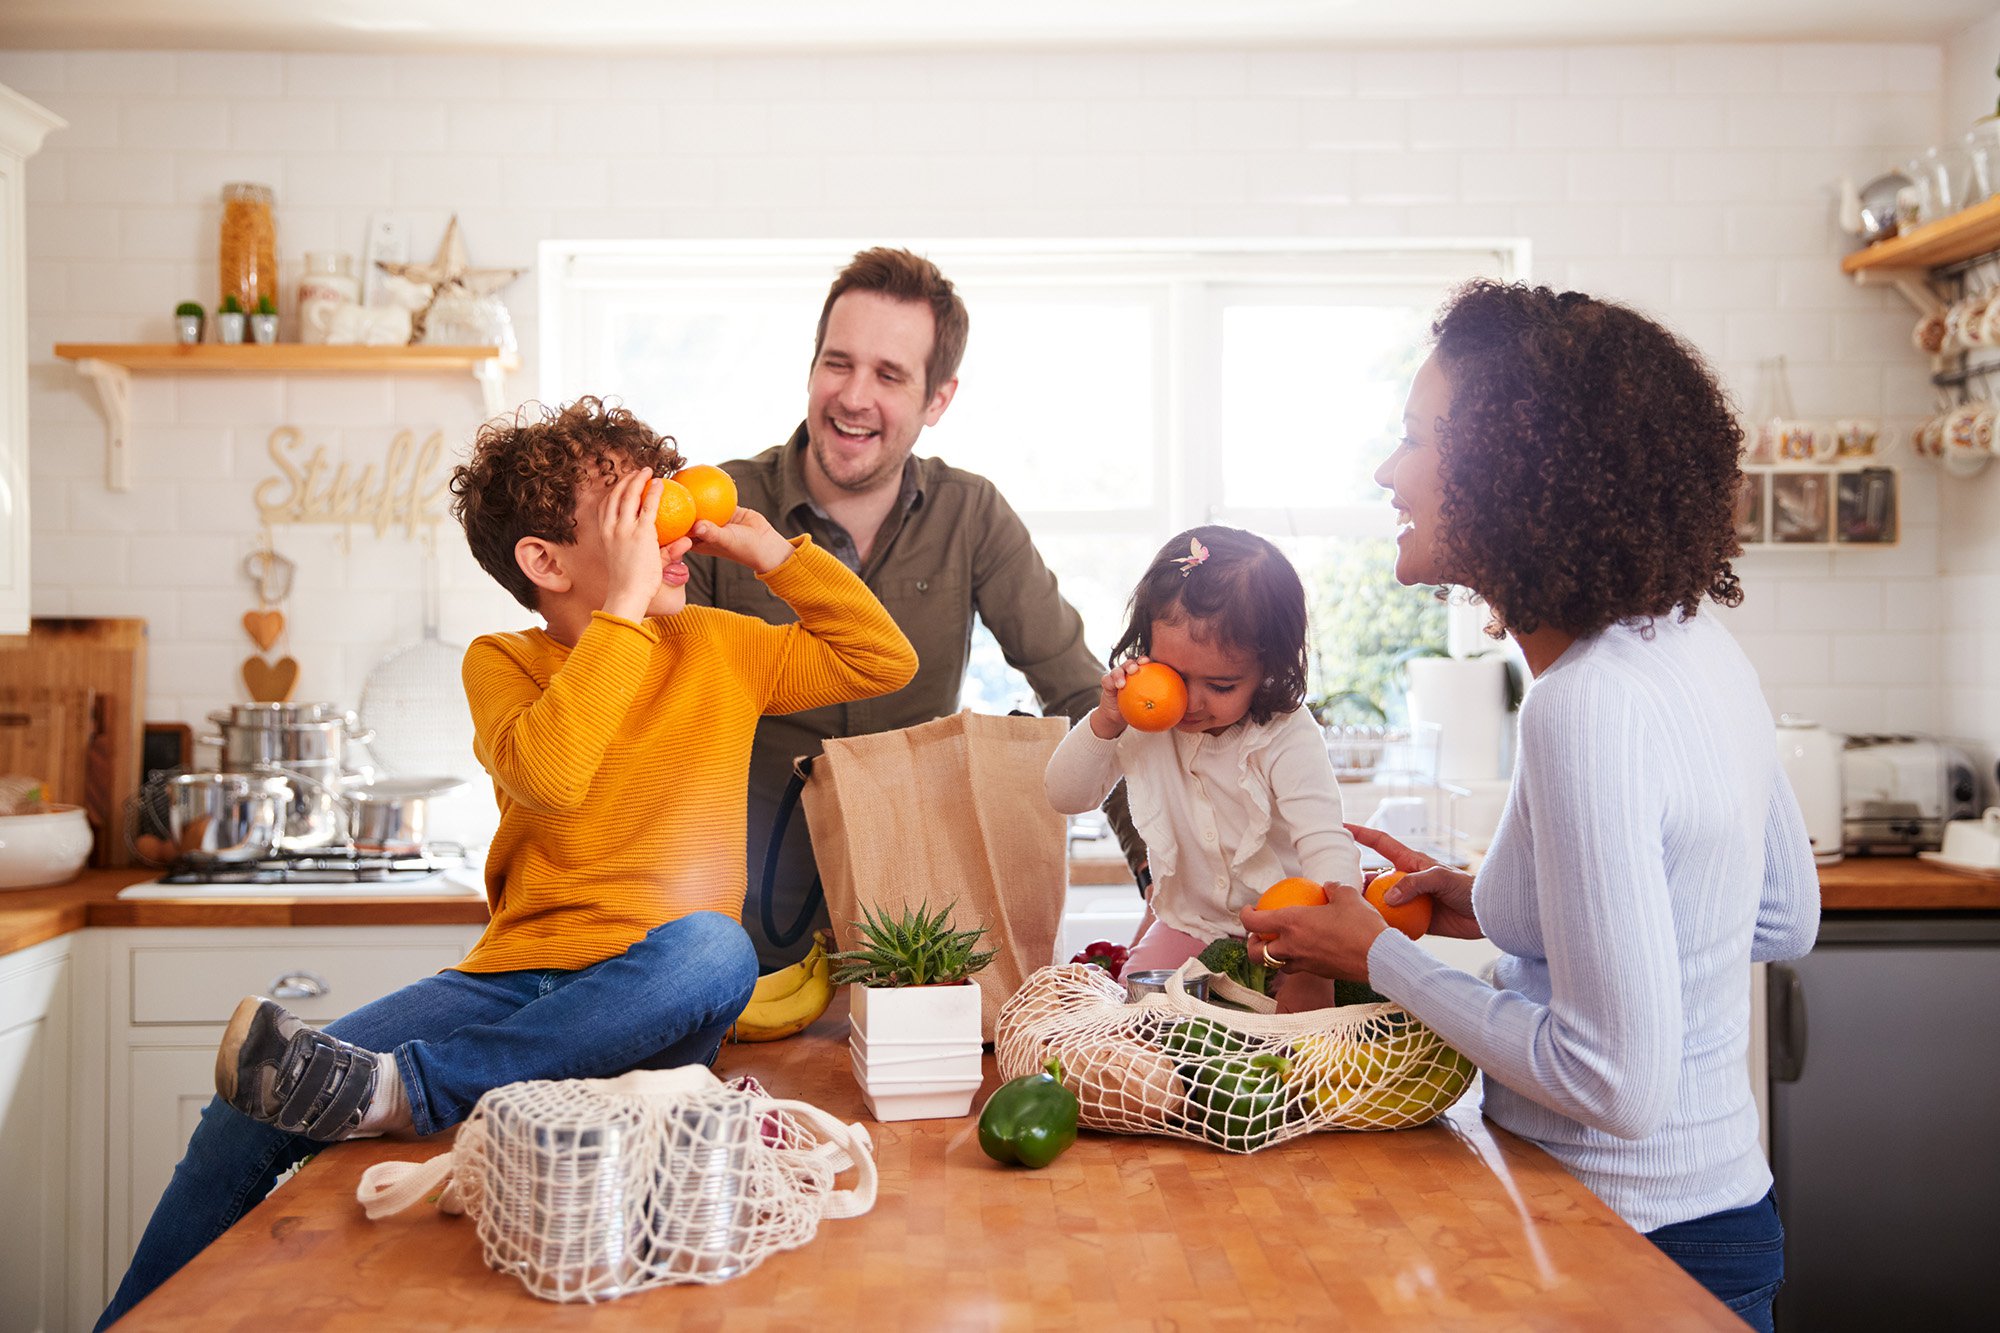 Family Returning Home From Shopping Trip Using Plastic Free Bags Unpacking Groceries In Kitchen stock photo